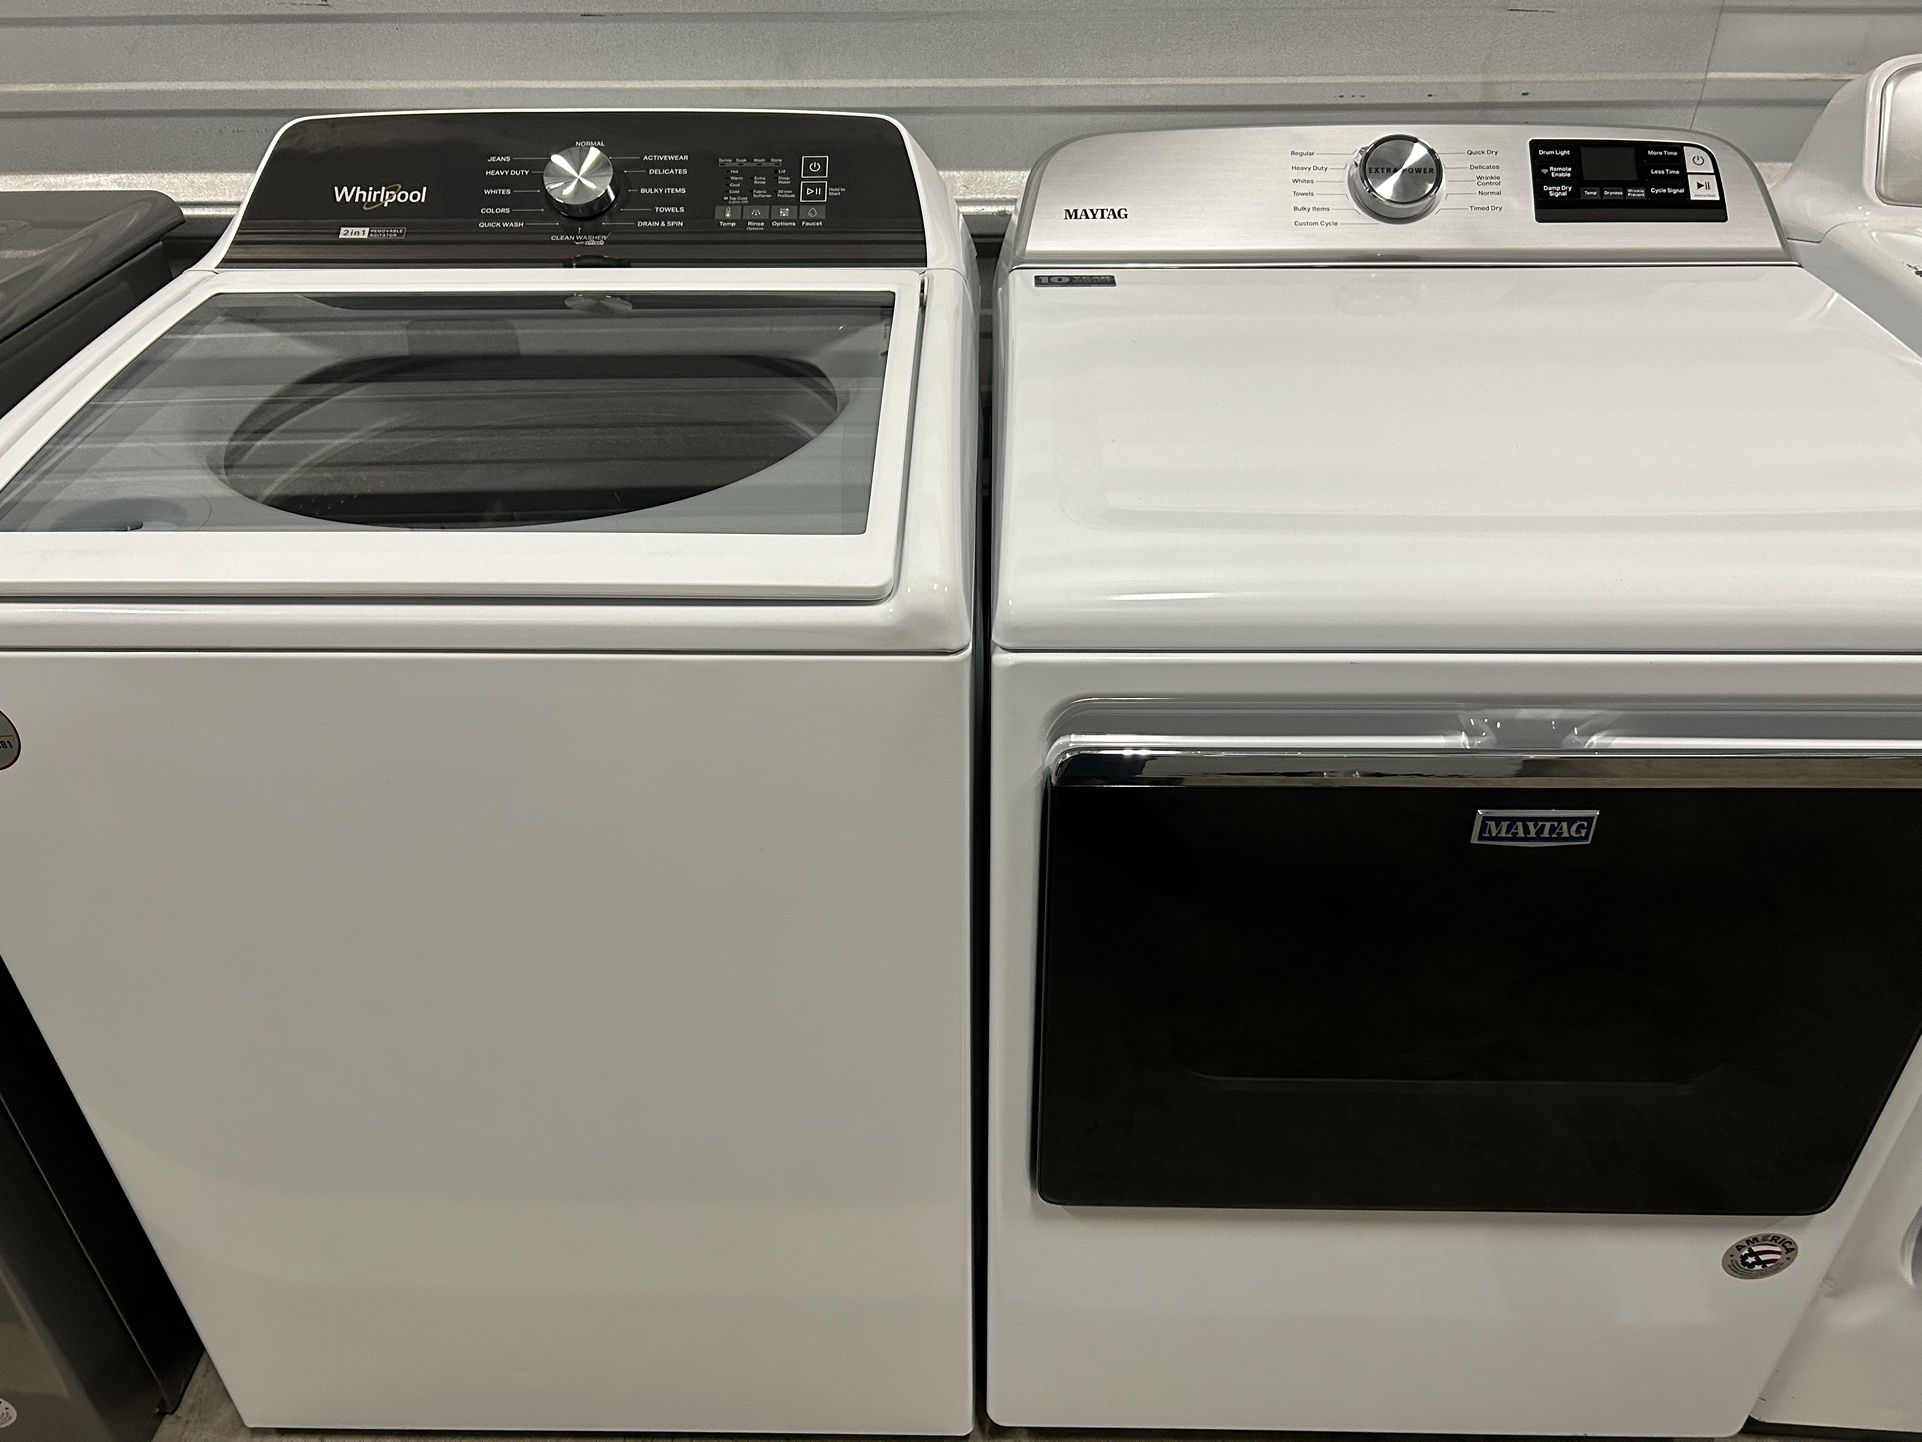 Whirlpool Washer 2in1/ Maytag Dryer Delivery Available For A Fee 